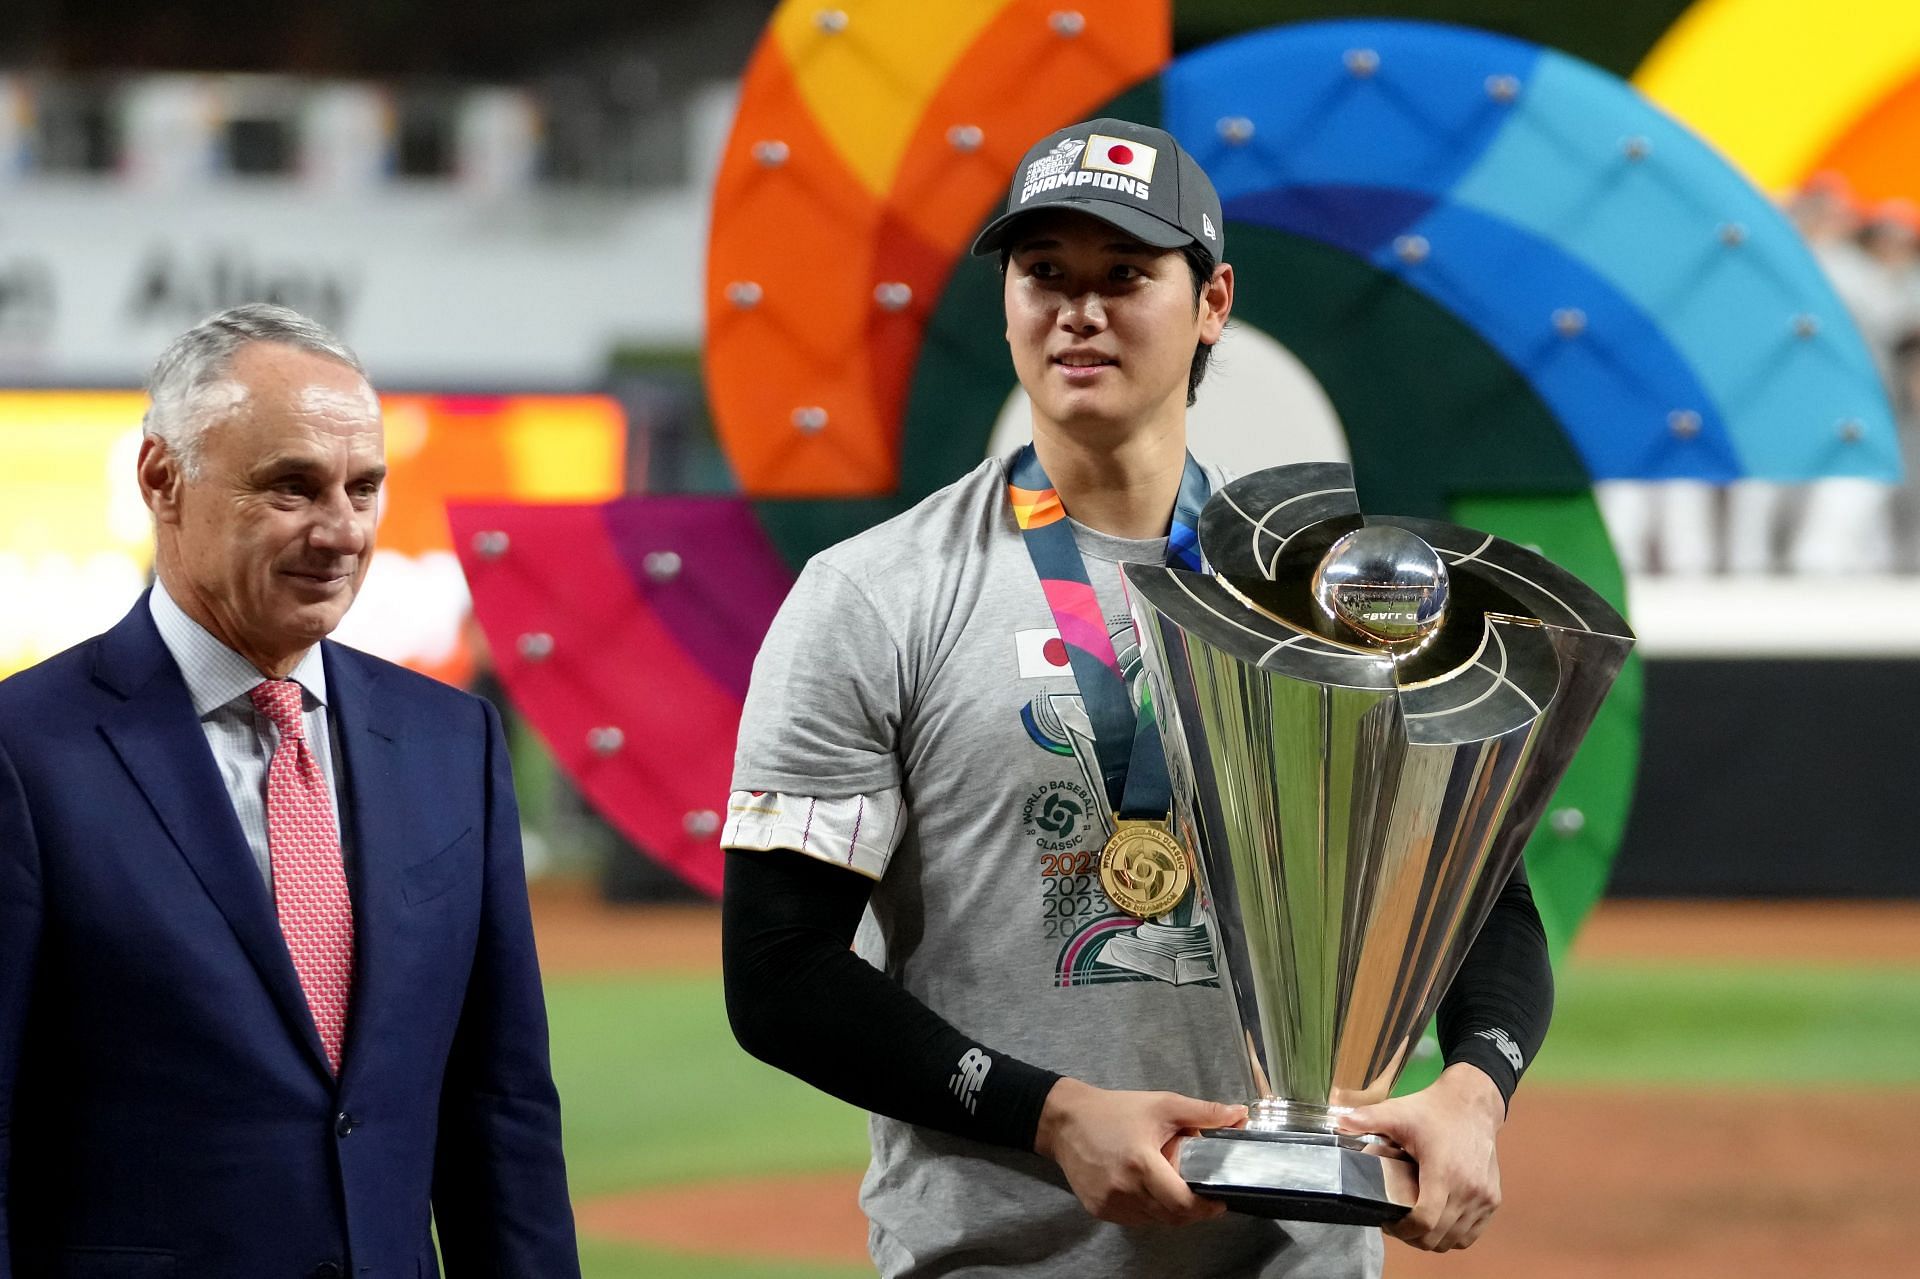 Lars Nootbaar and Shohei Ohtani bond from WBC, possibly to benefit